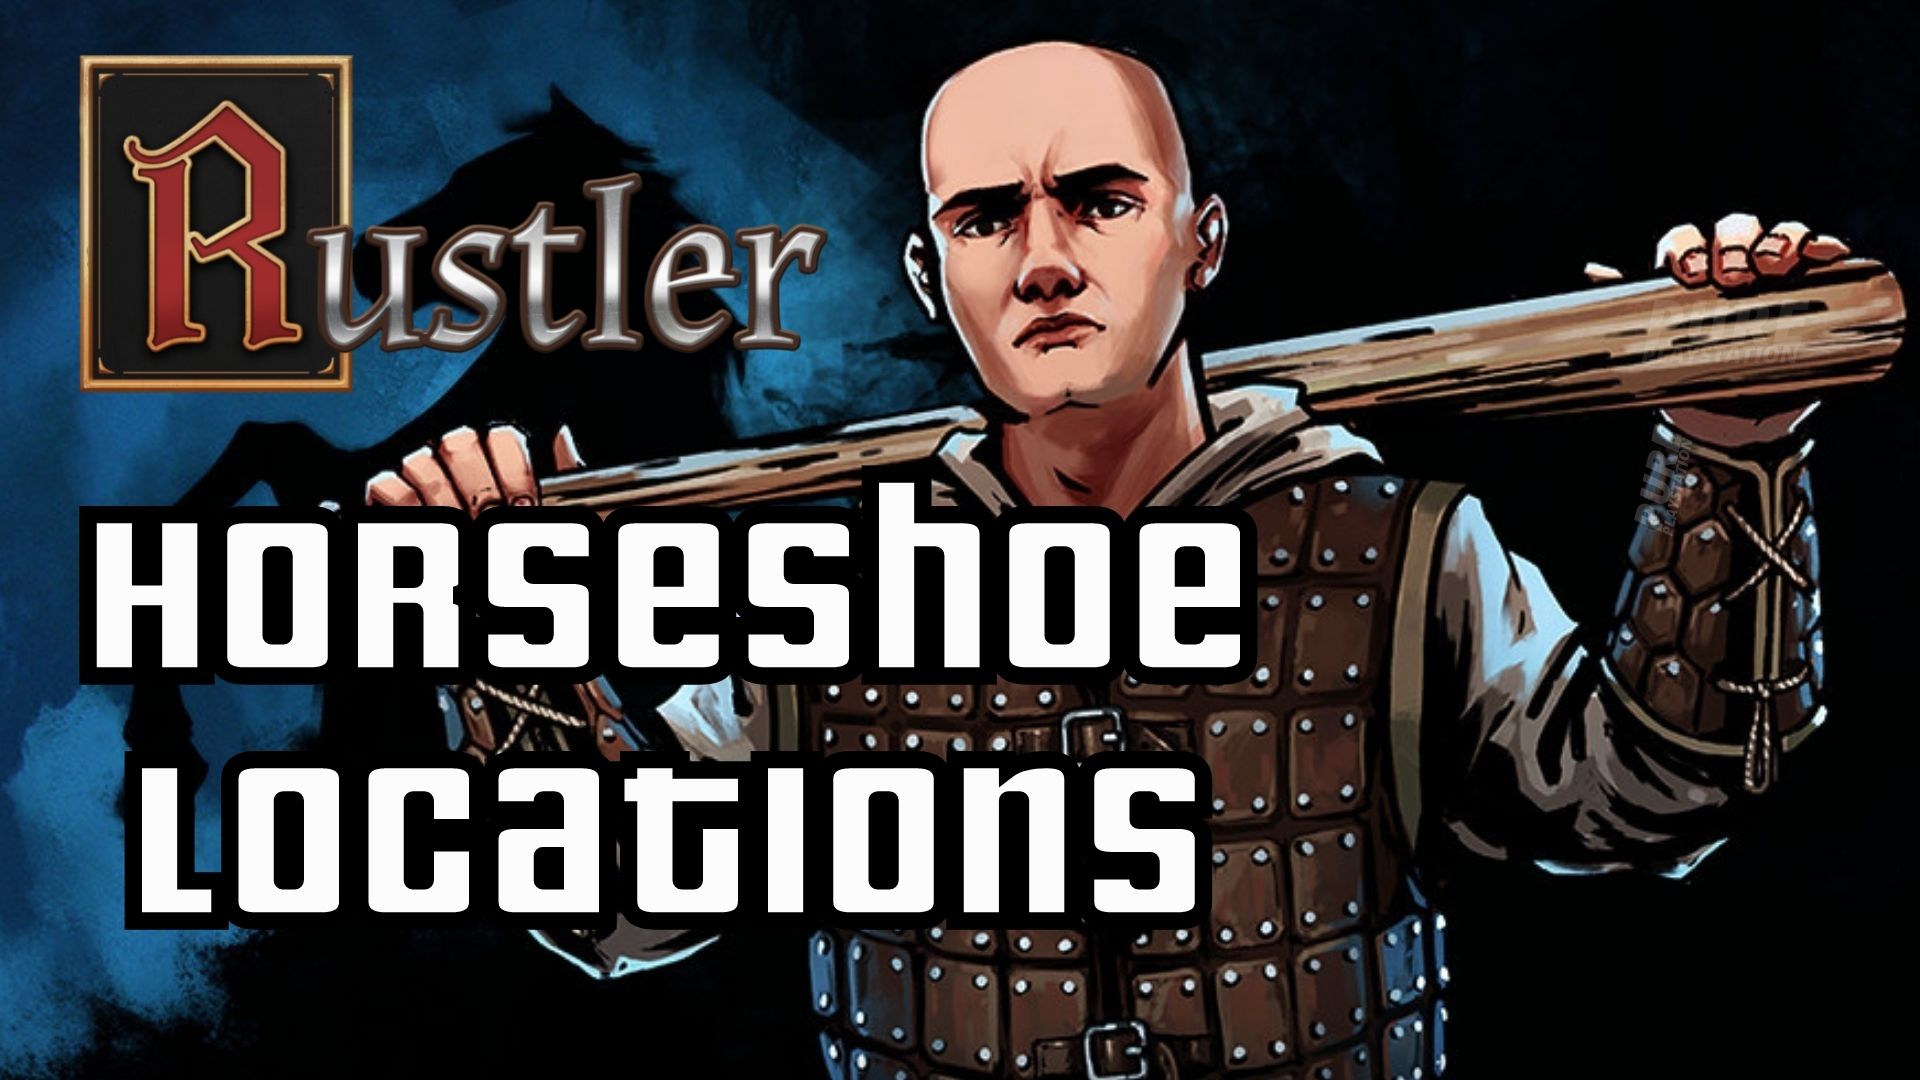 Guide: Where to Find All Horseshoes in Rustler - All Horseshoe Locations